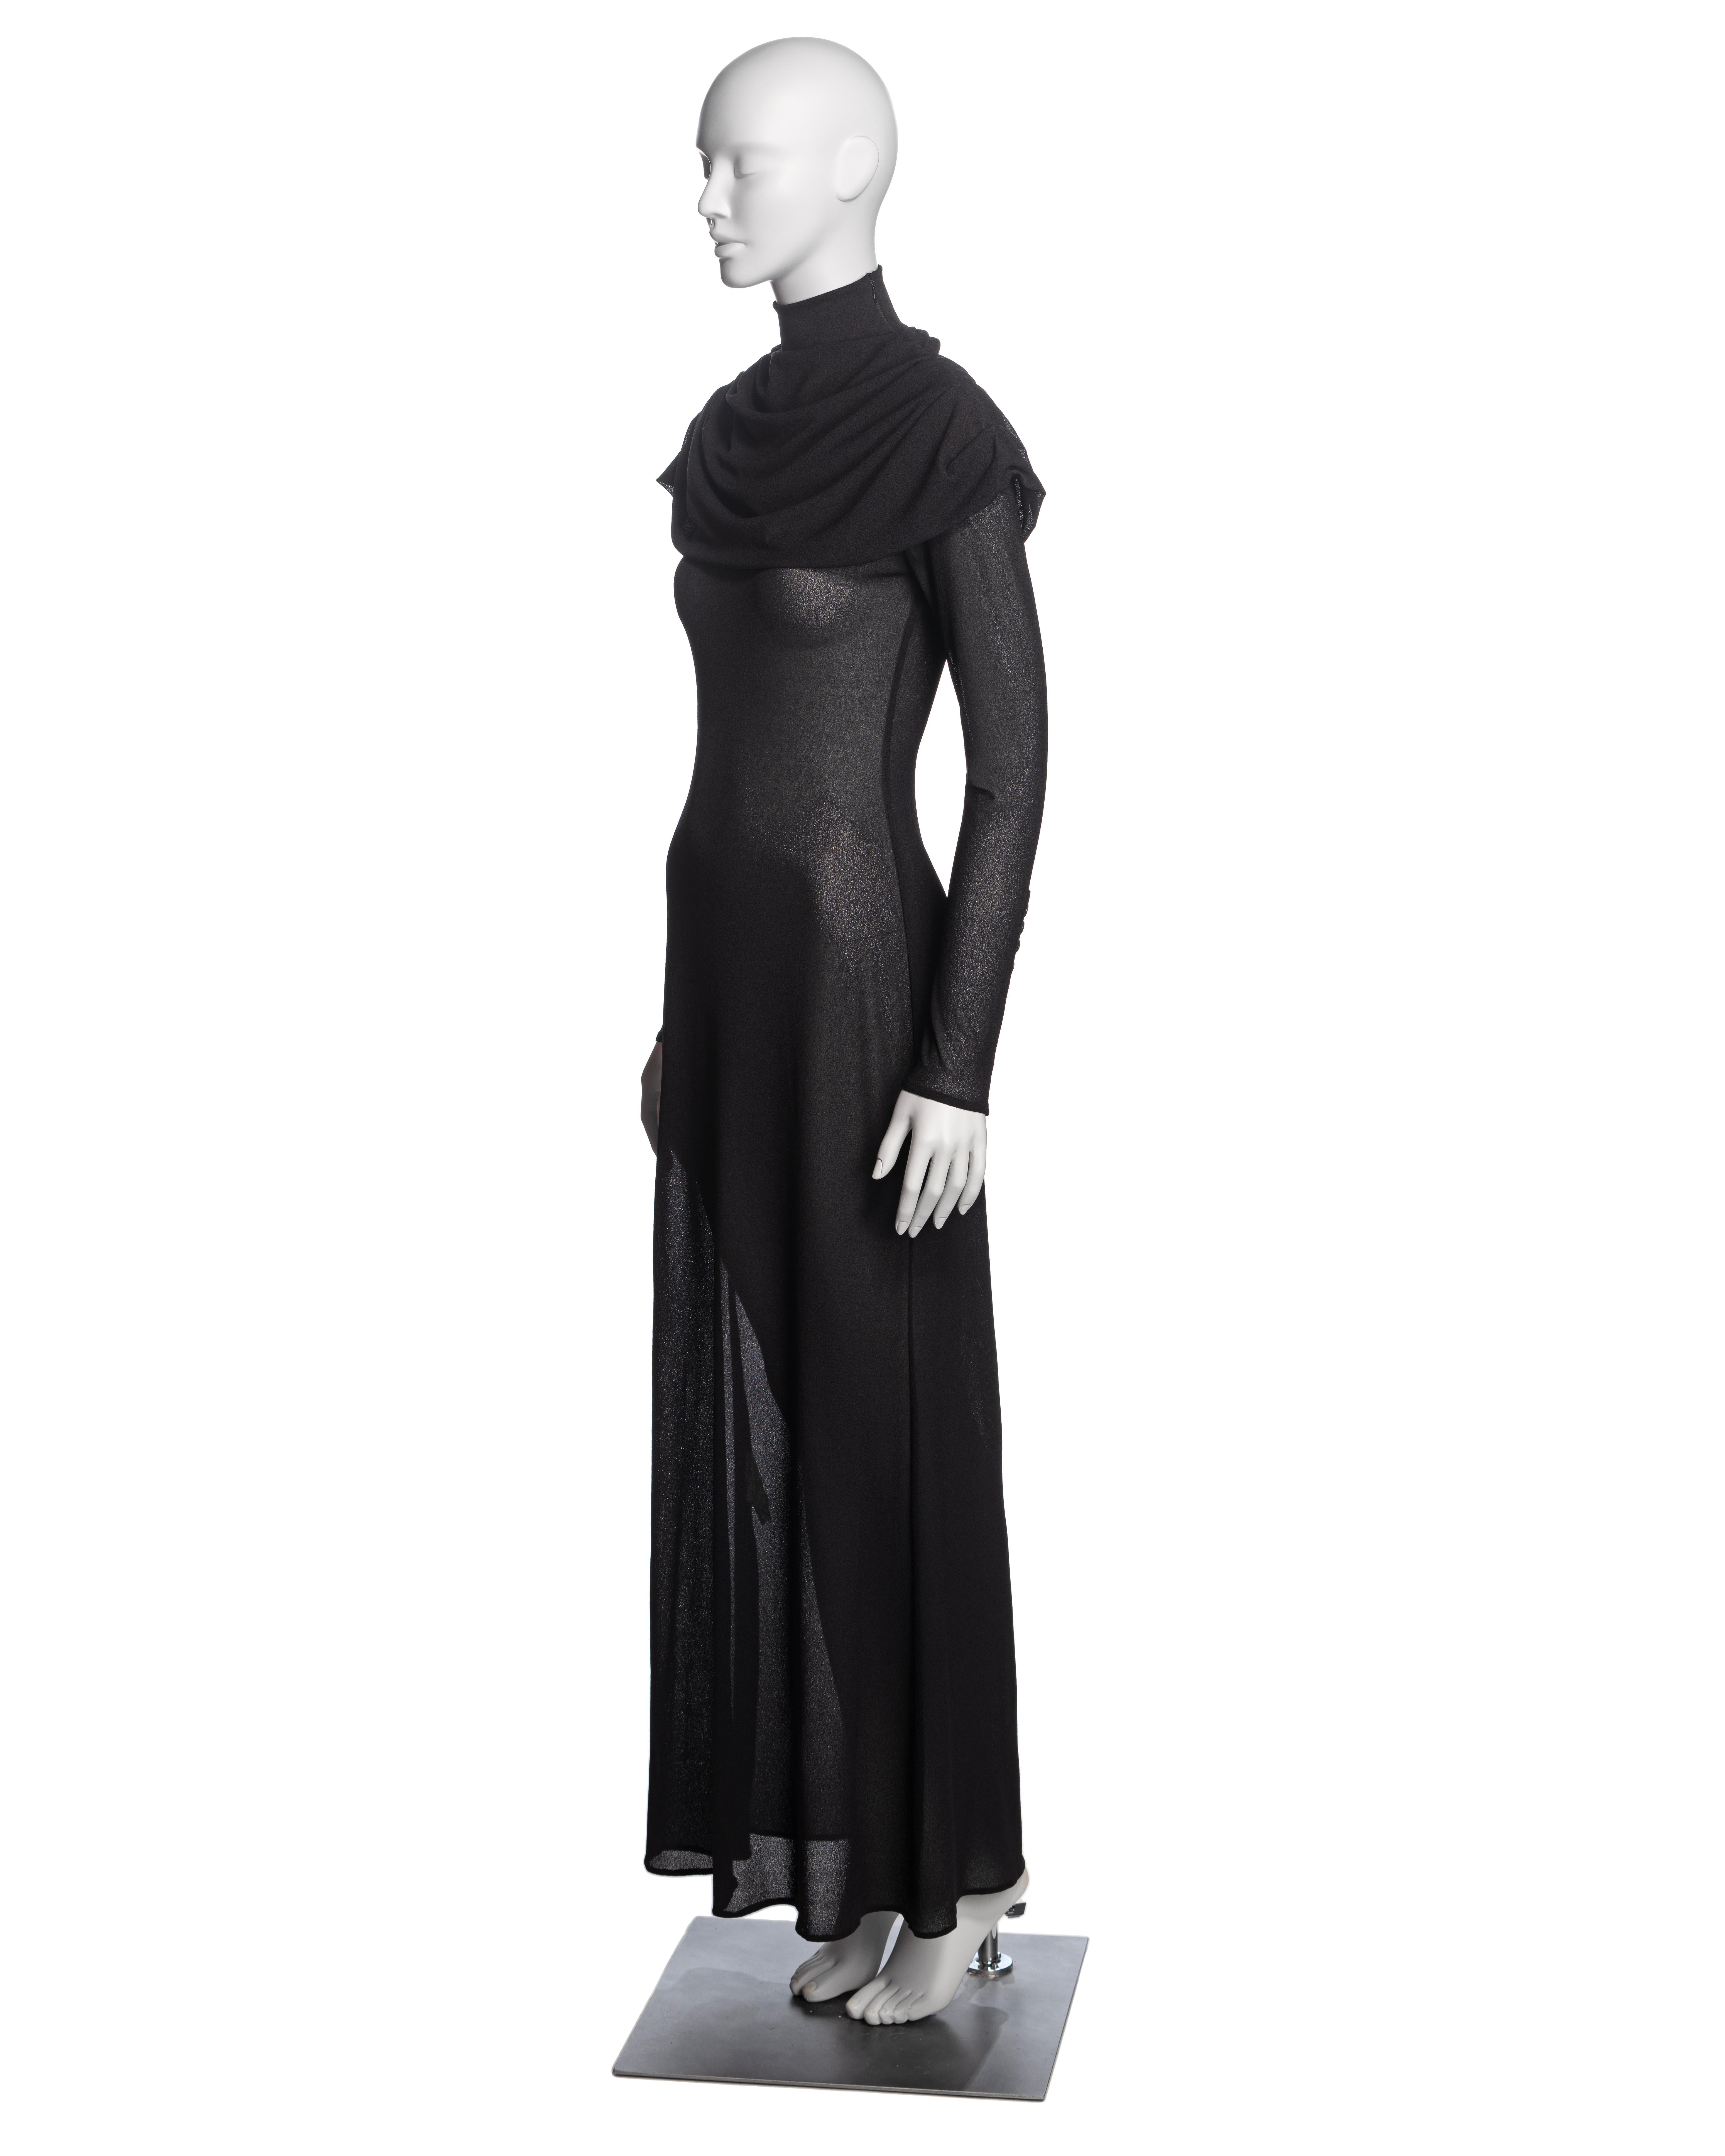 Alexander McQueen Black Mock Neck Evening Dress with Draped Cowl, 'Joan' FW 1998 For Sale 9